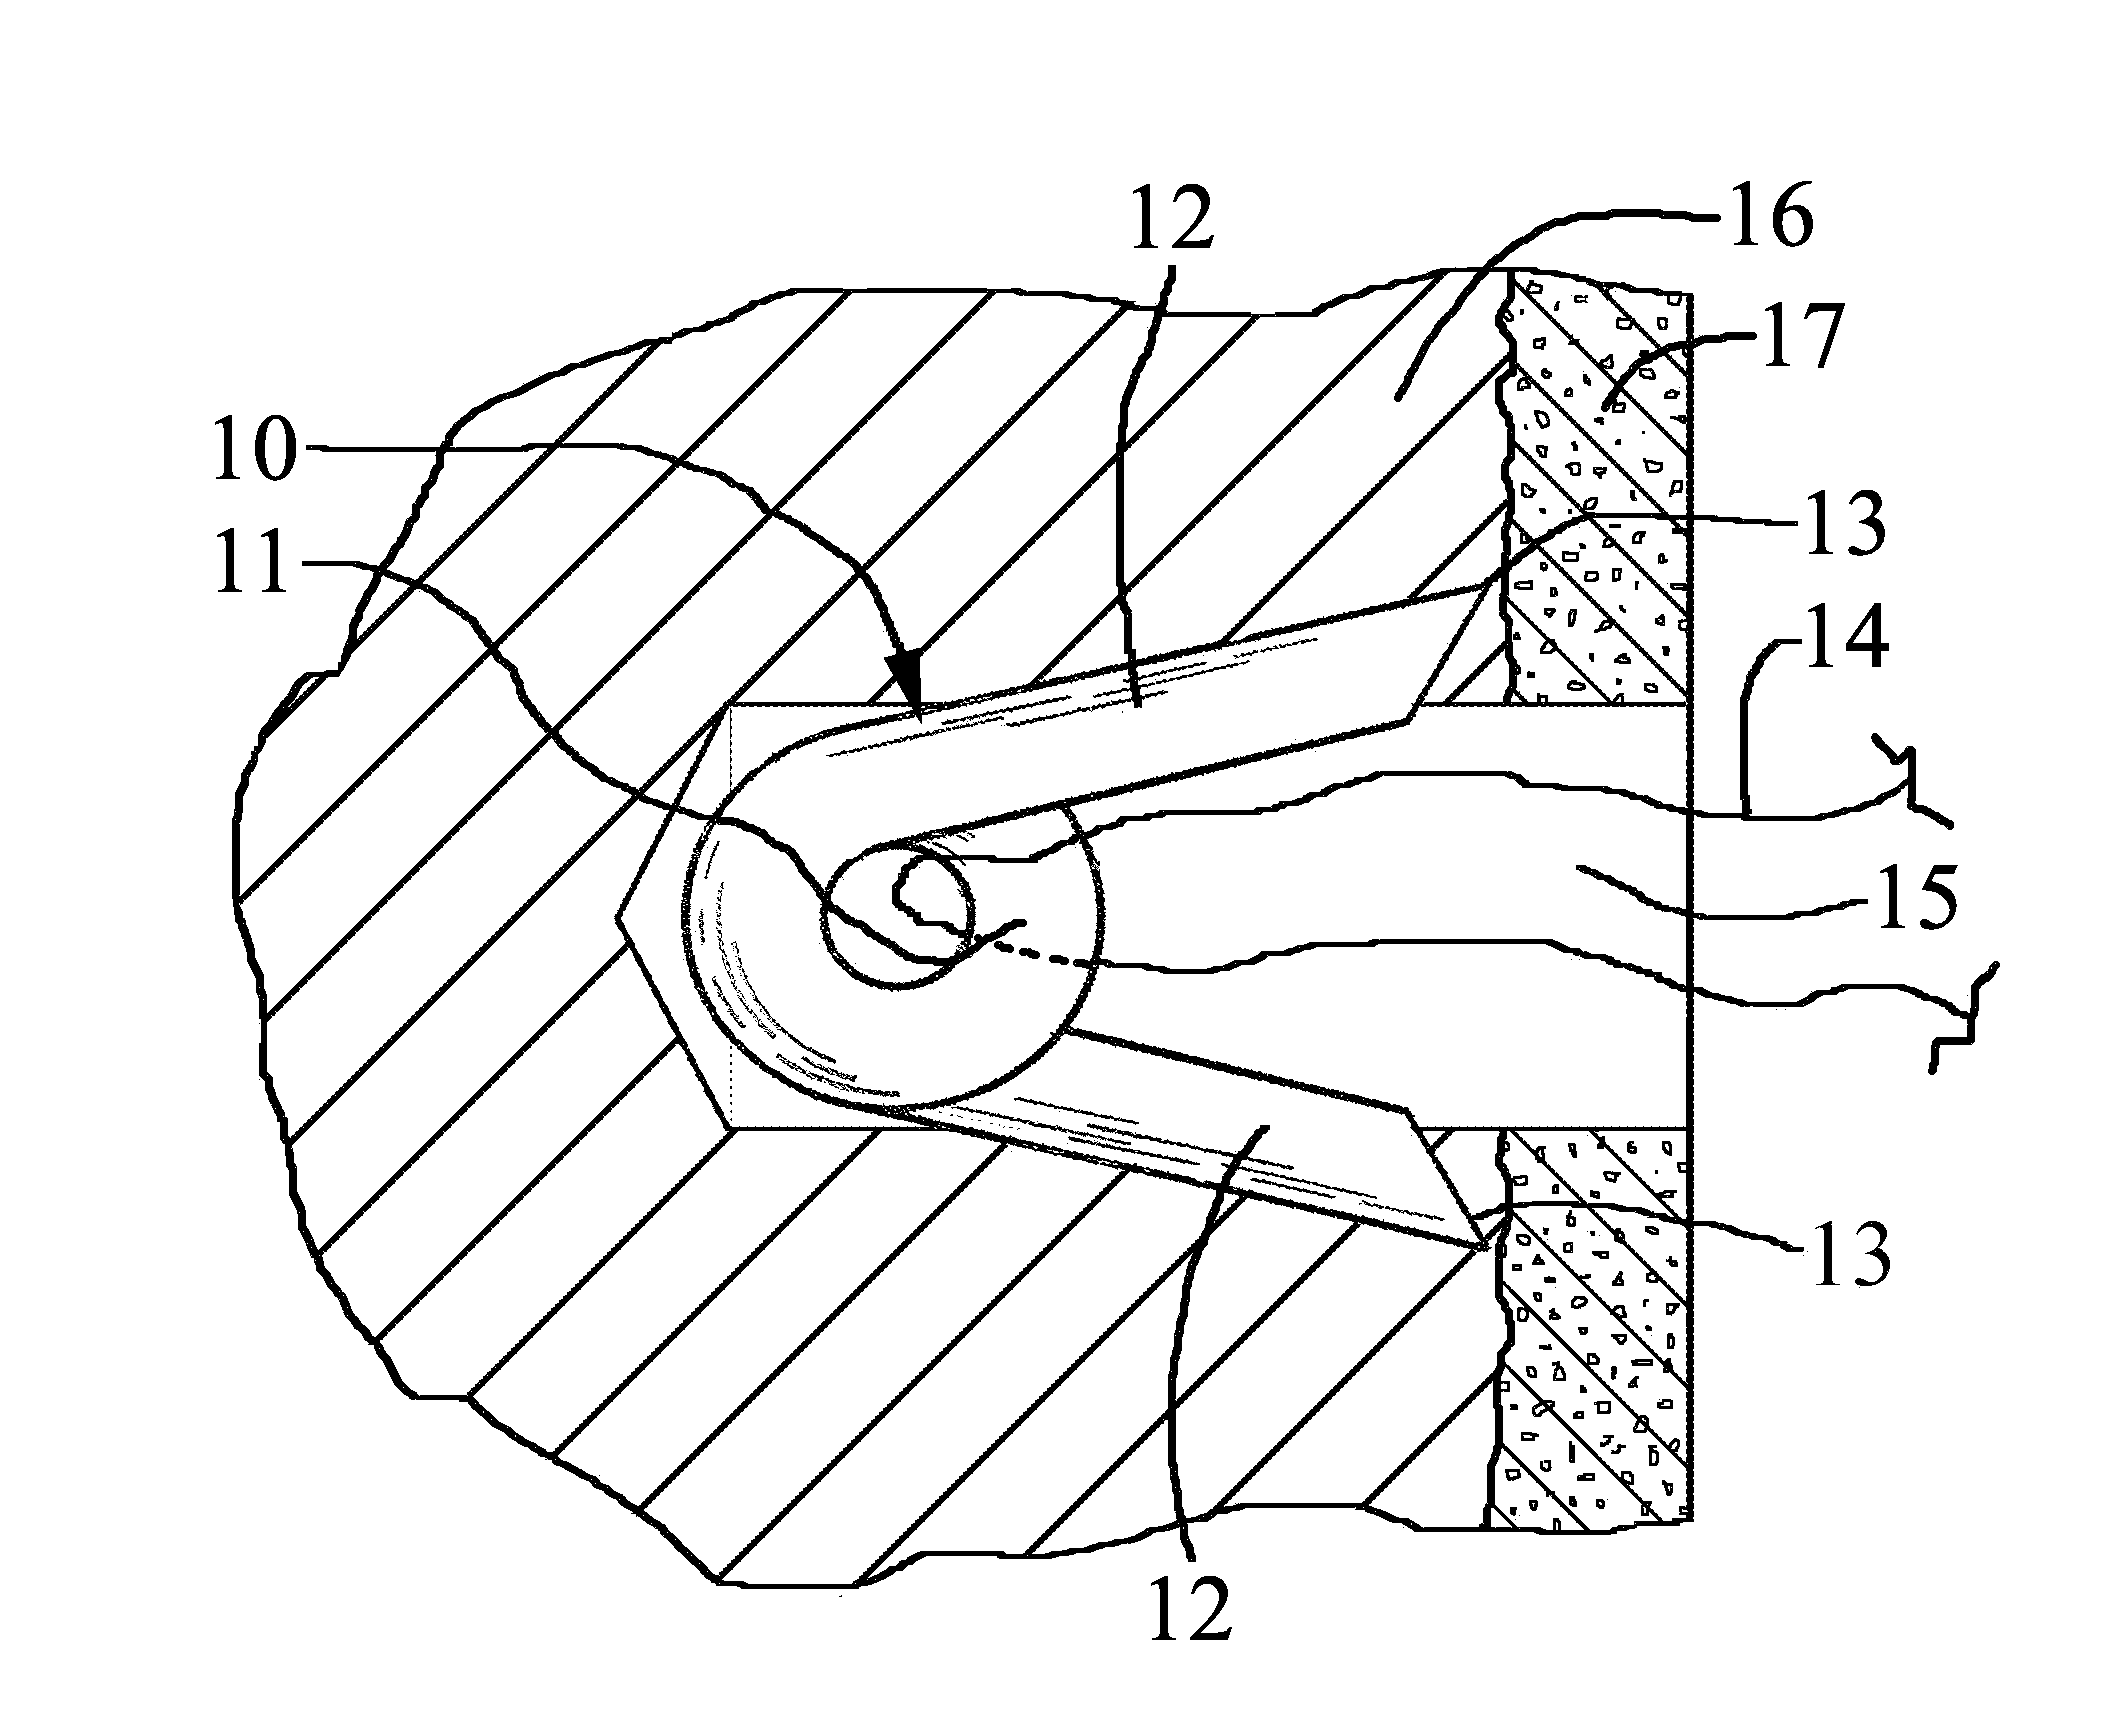 Suture anchor and method for attaching soft tissue to bone